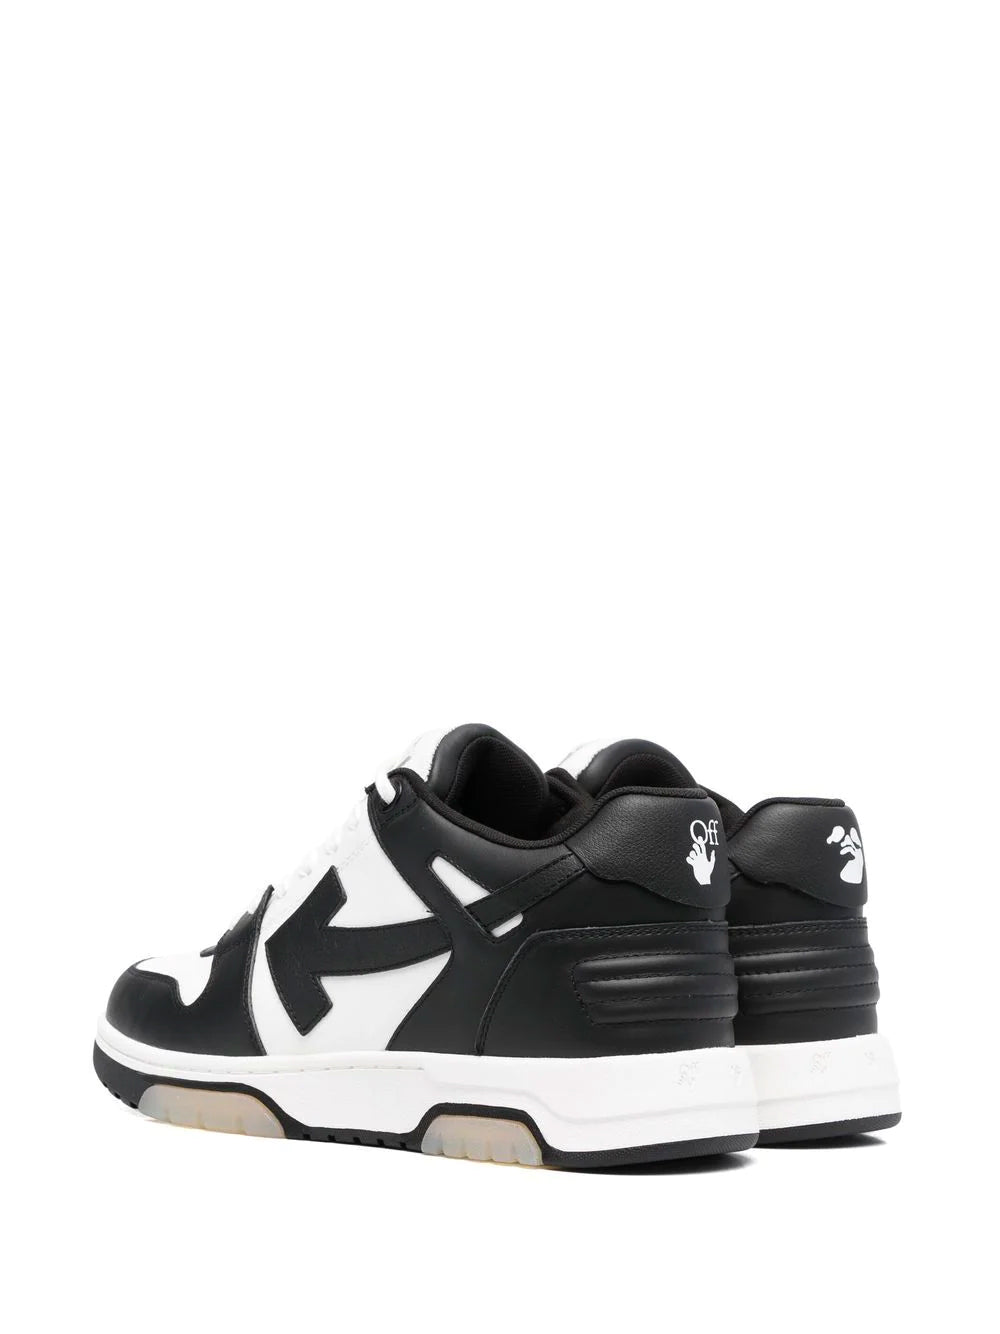 OFF-WHITE Out Of Office Low Top Sneakers White/Black - MAISONDEFASHION.COM